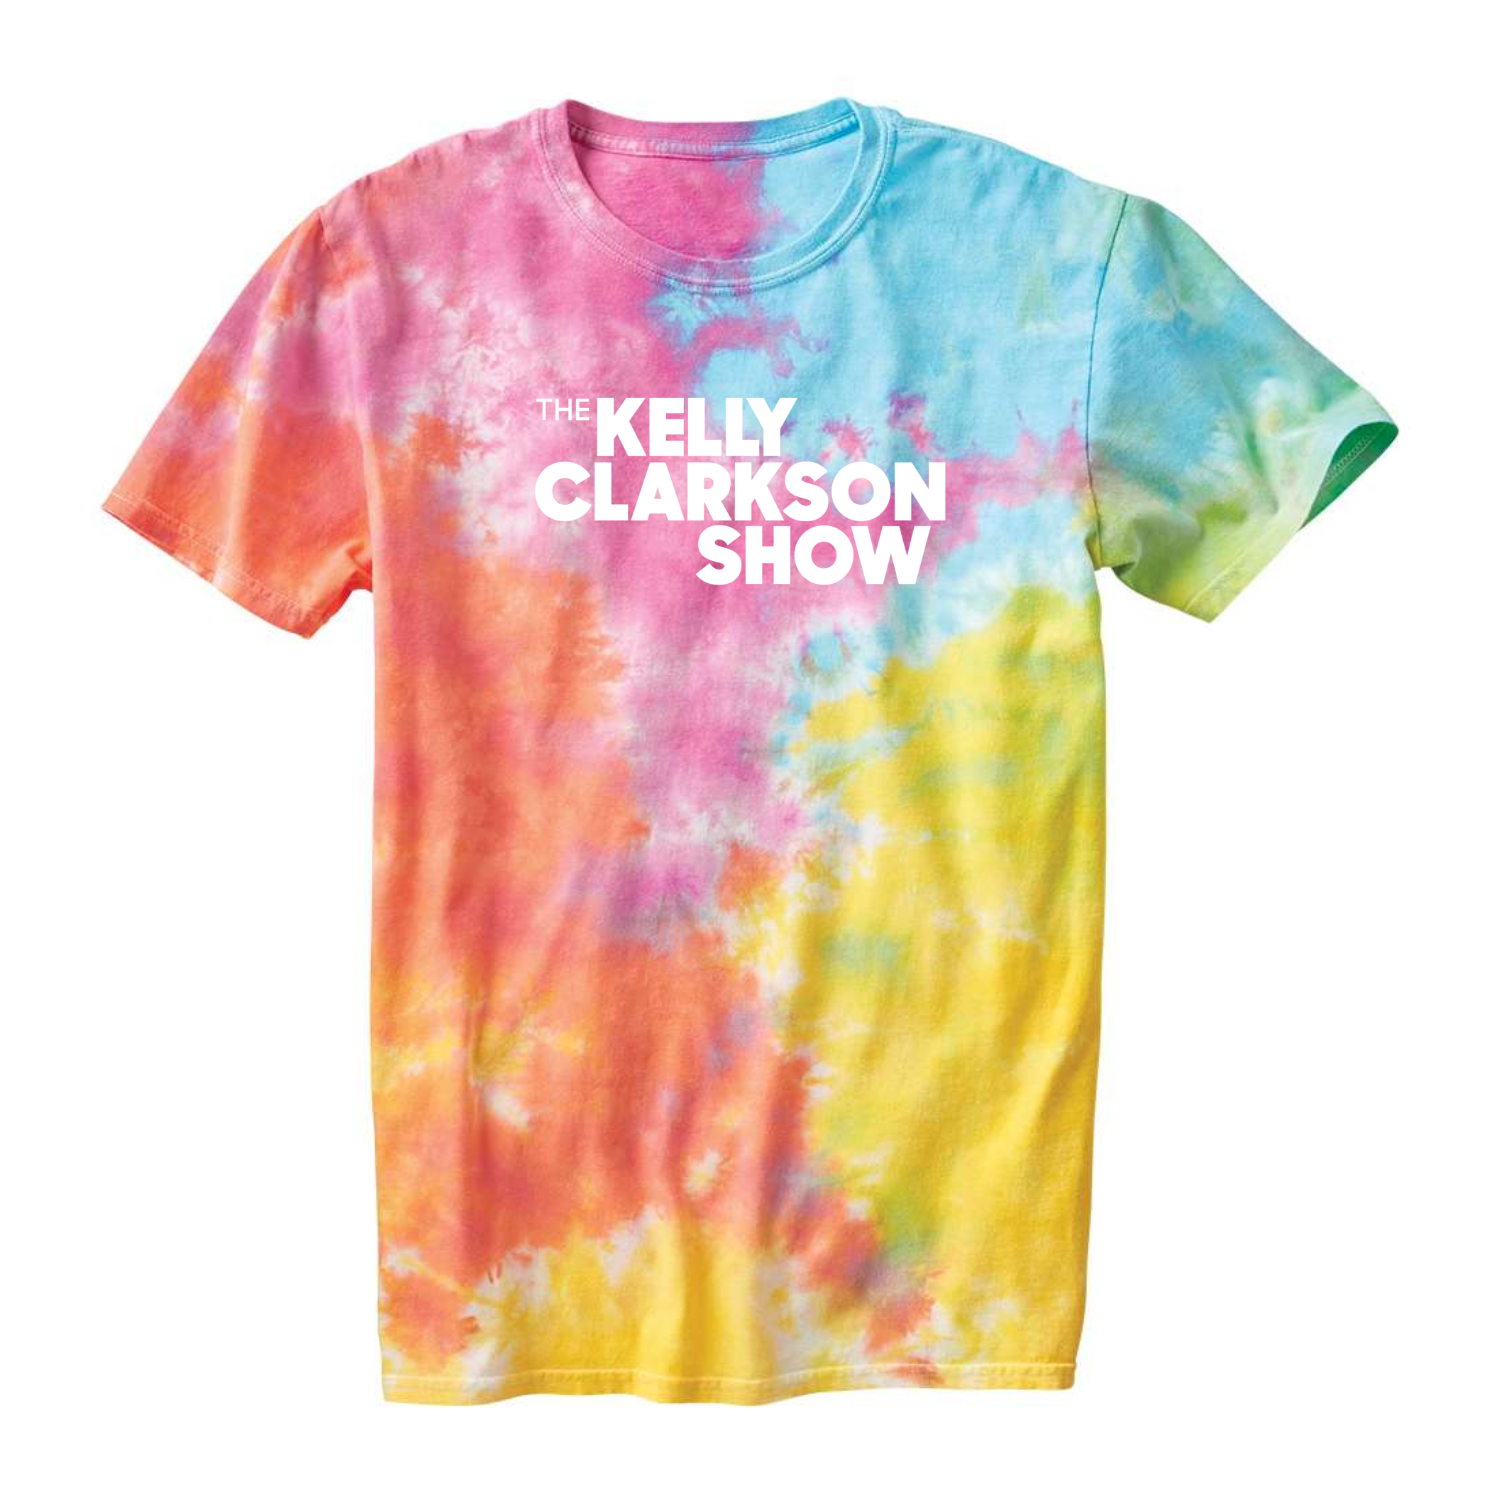 The Kelly Clarkson Show Multi-Color Slushie Crinkle Tie Dye T-Shirt - Aerial